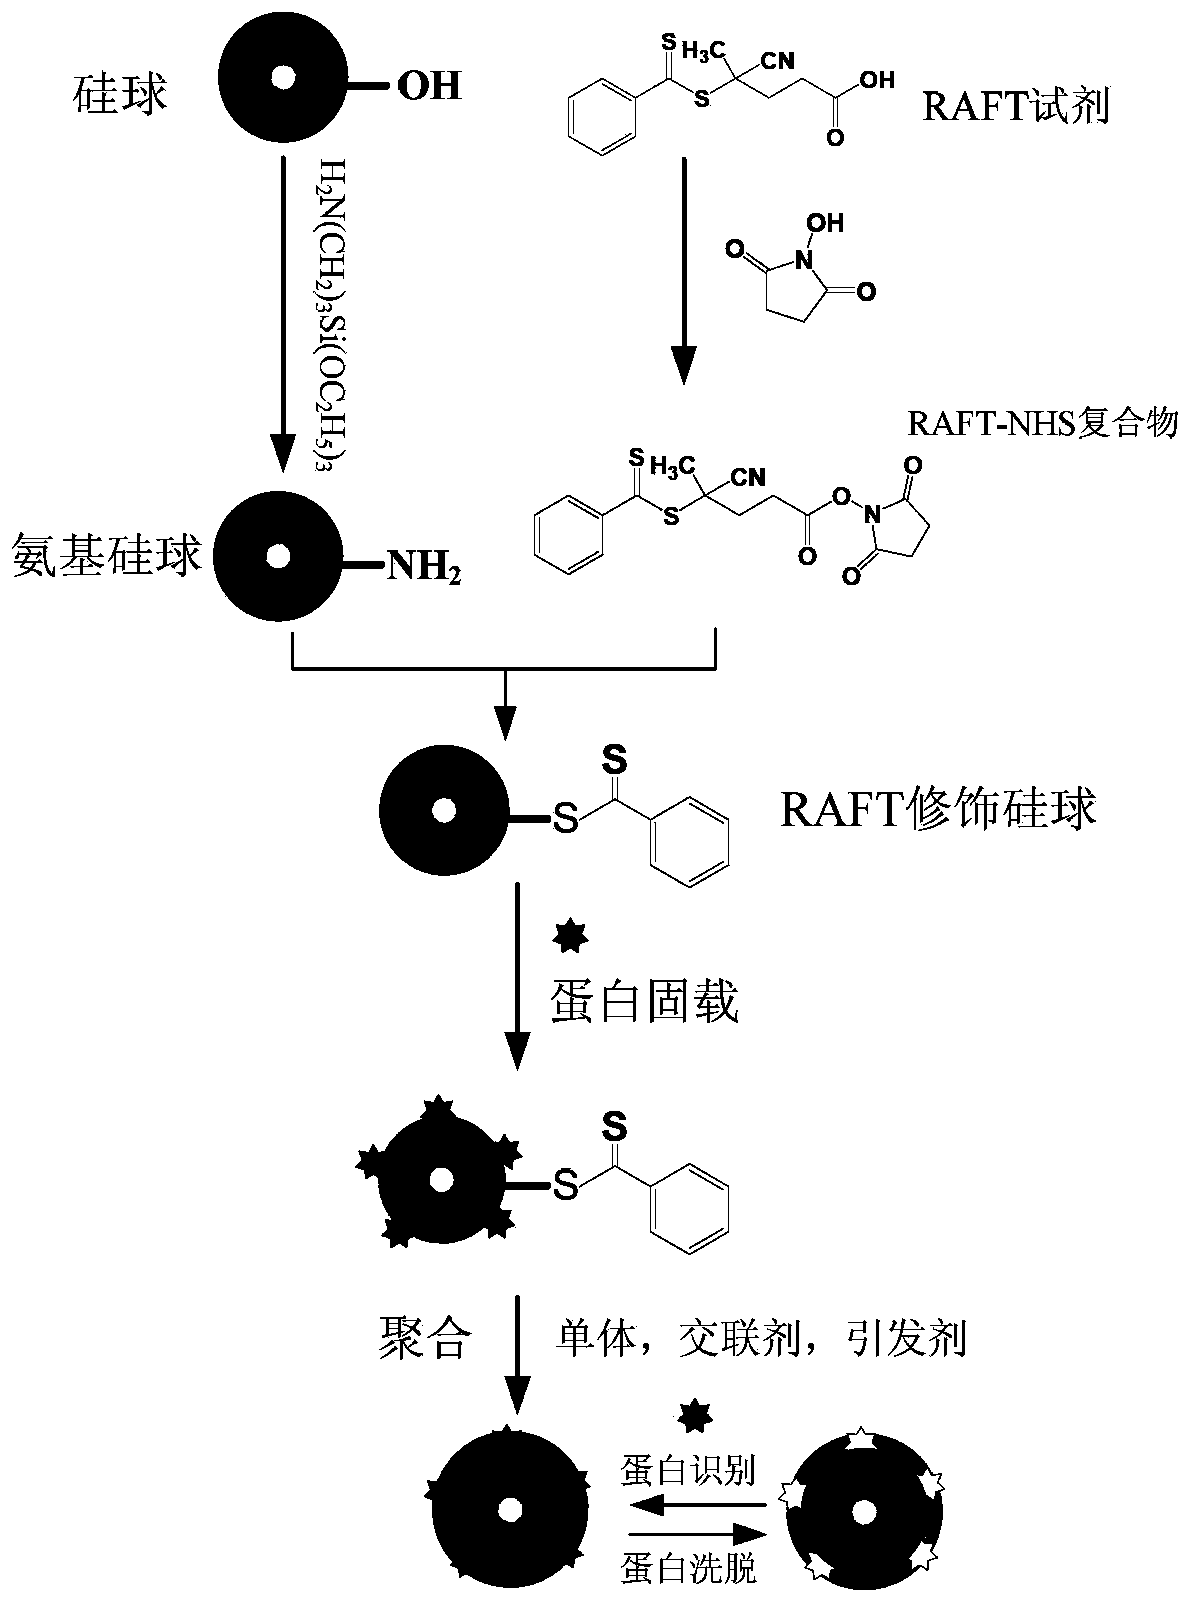 Protein surface molecular imprinting material based on RAFT (Reversible Addition-Fragmentation Chain Transfer) strategy as well as preparation method and application thereof